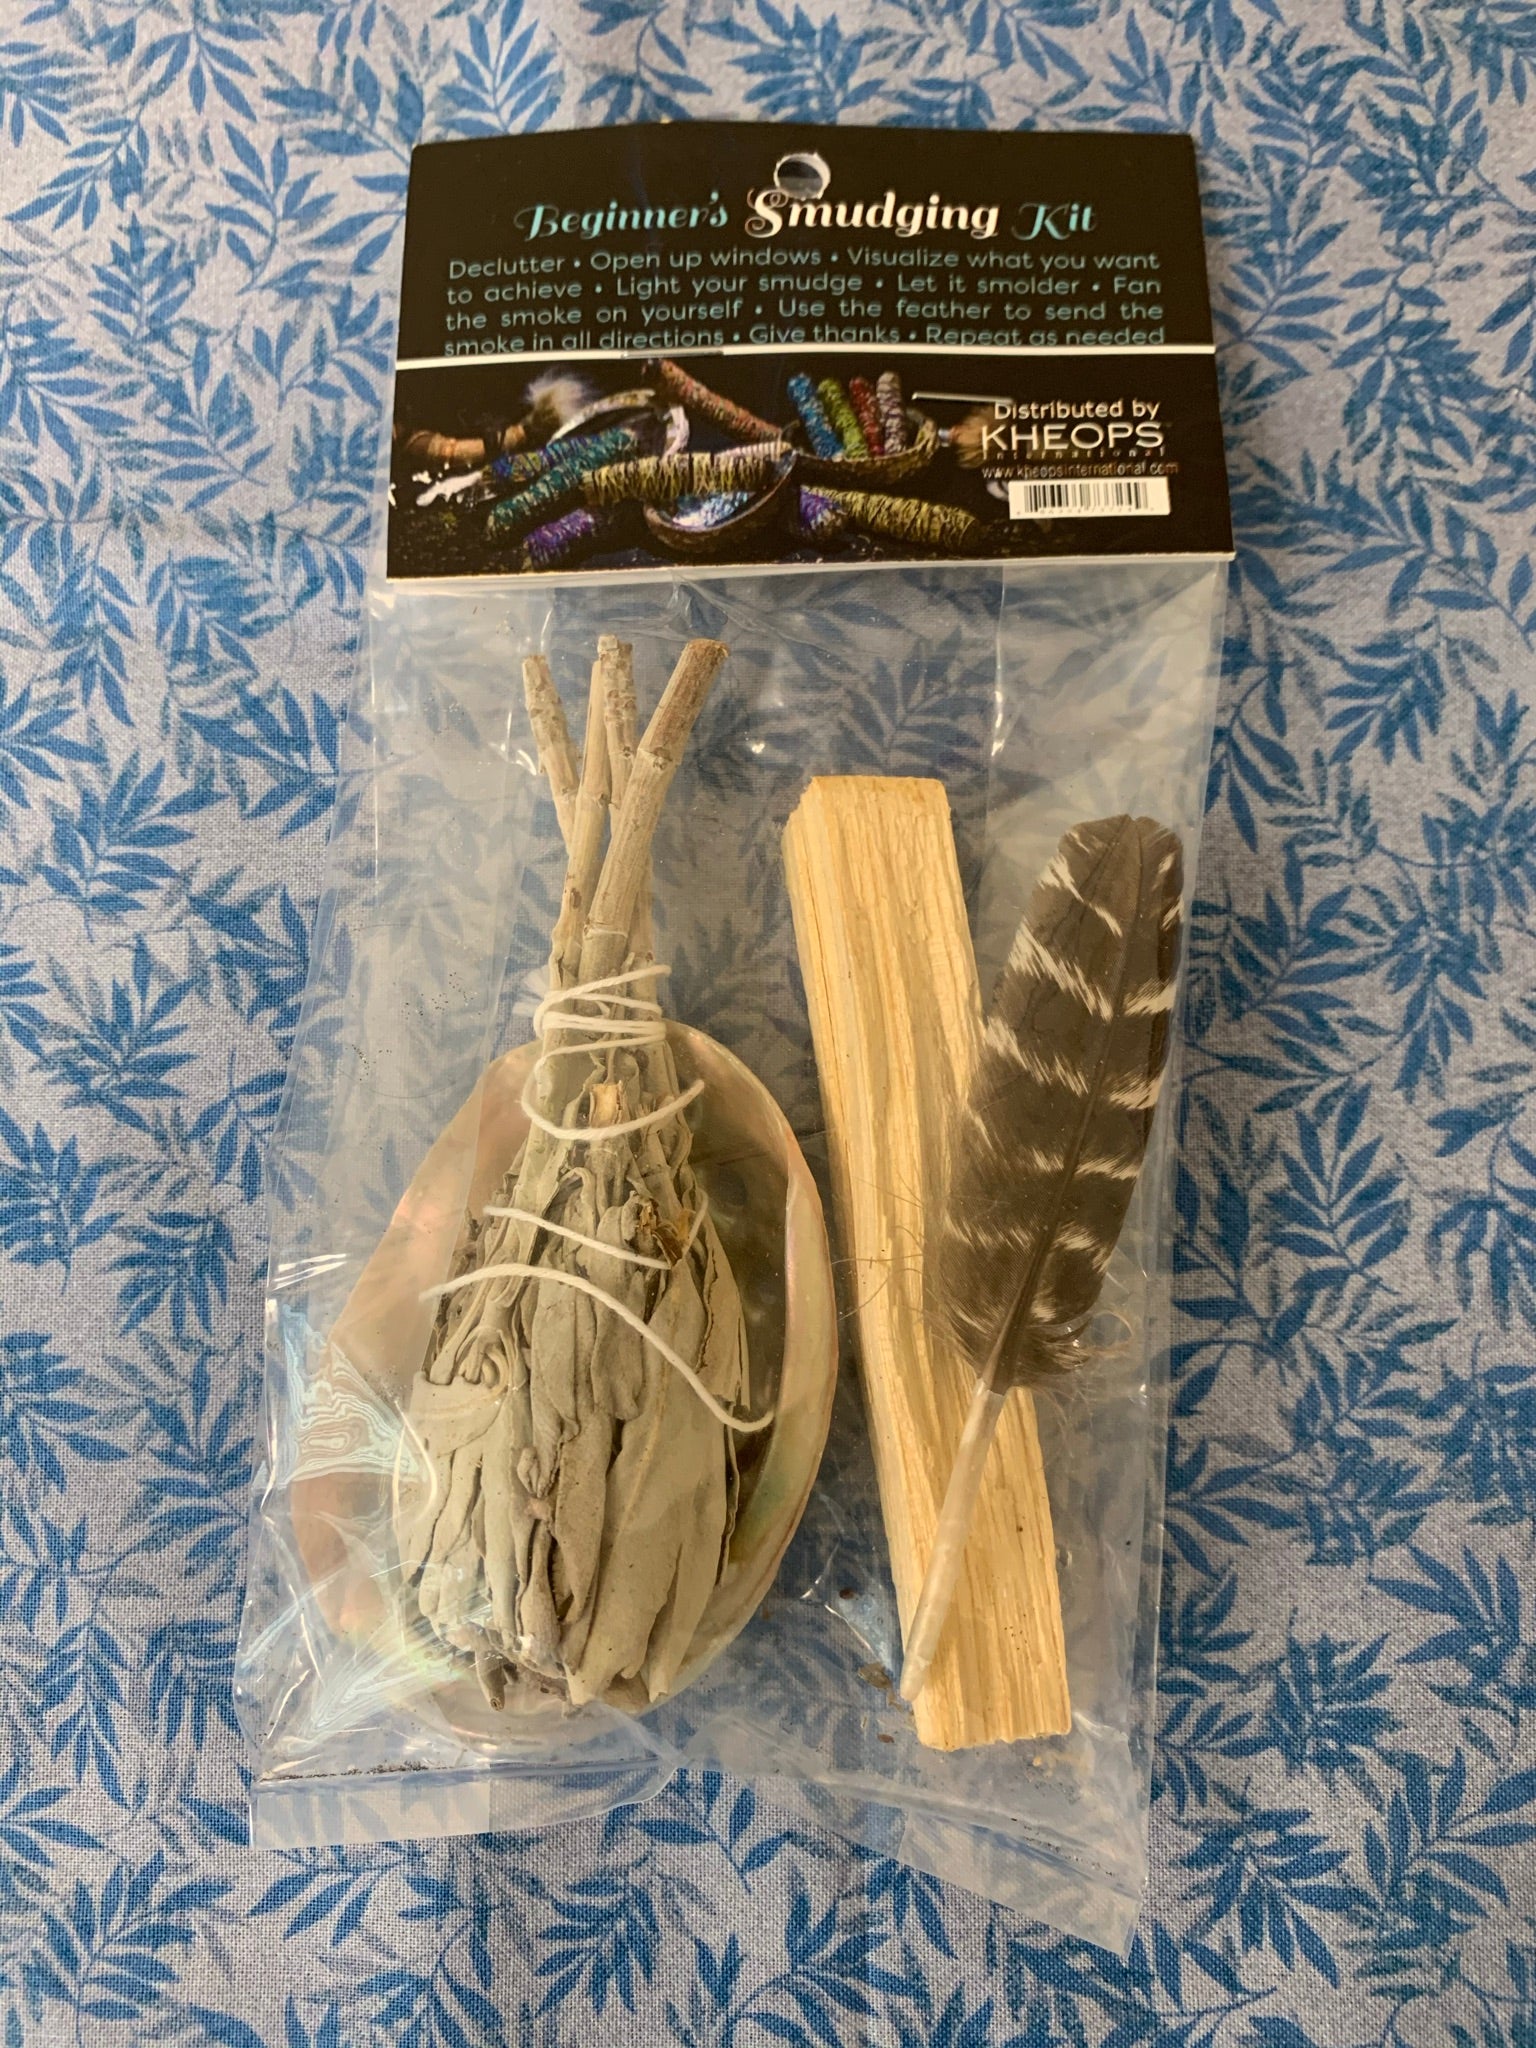 This is a mini smudging kit. It includes a small white sage smudging stick, a Palo Santo stick, a small smudging feather and a small abalone shell. Smudging with sage has its roots in Native American traditions. Use it to: *Cleanse, clear & purify your space or environment - home, office, *Cleanse, clear or purify a person & their energy *Promote healing *Promote clarity of mind *Clear out spiritual impurities *Enhance ceremony or ritual. Cost is $9.50.